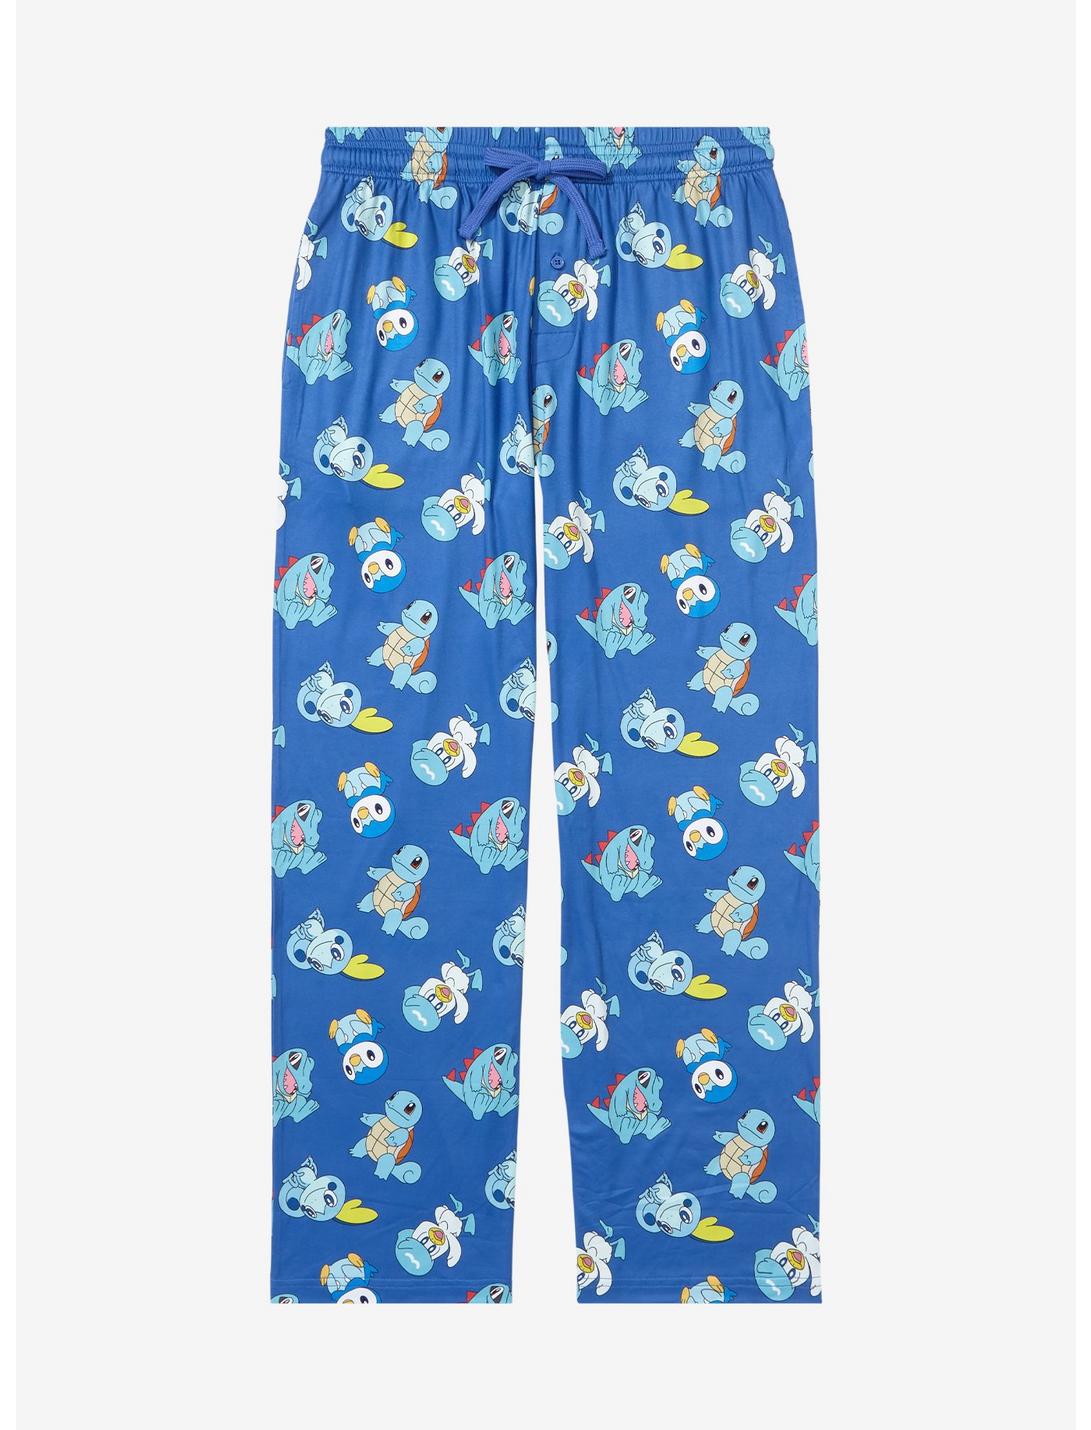 Pokémon Water Type Allover Print Plus Size Sleep Pants - BoxLunch Exclusive, BLUE, hi-res